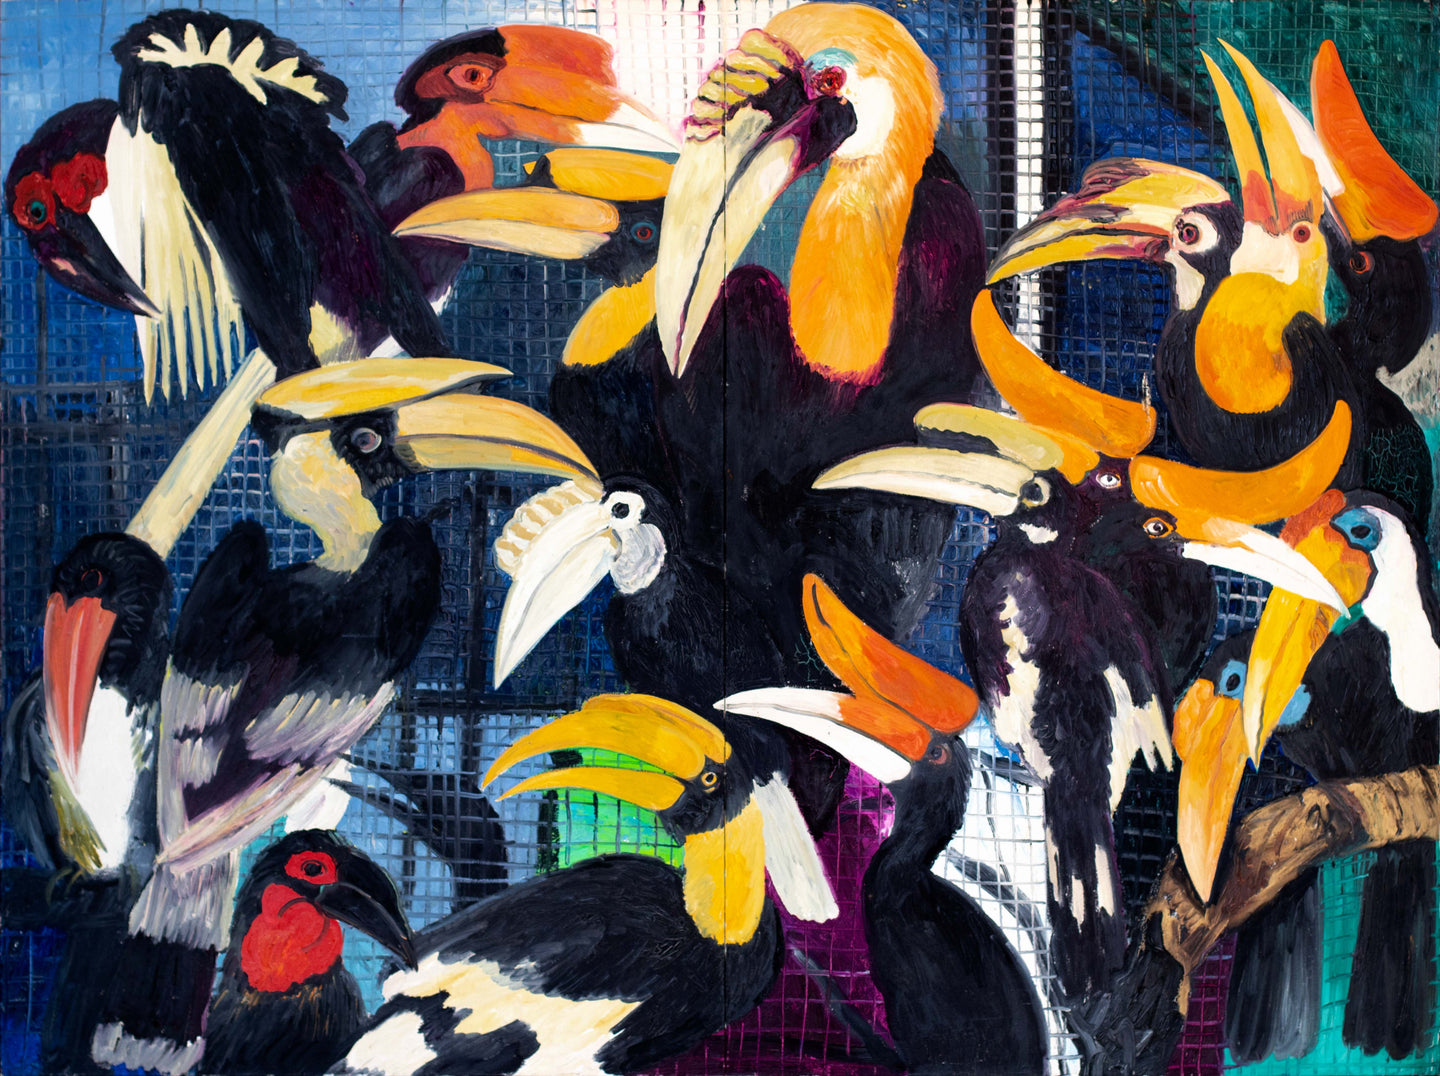  Hunt Slonem,  Hornbills, 1989, Oil on canvas, 66 x 88 inches. Hunt Slonem's paintings are at once vibrant, energetic and colorful, yet also deeply spiritual and contemplative. The artist creates exotic forms with expressive and highly textural brushstrokes that are full of intense color, loosely inspired by artists of the German Expressionism movement.  Available at Manolis Projects Gallery